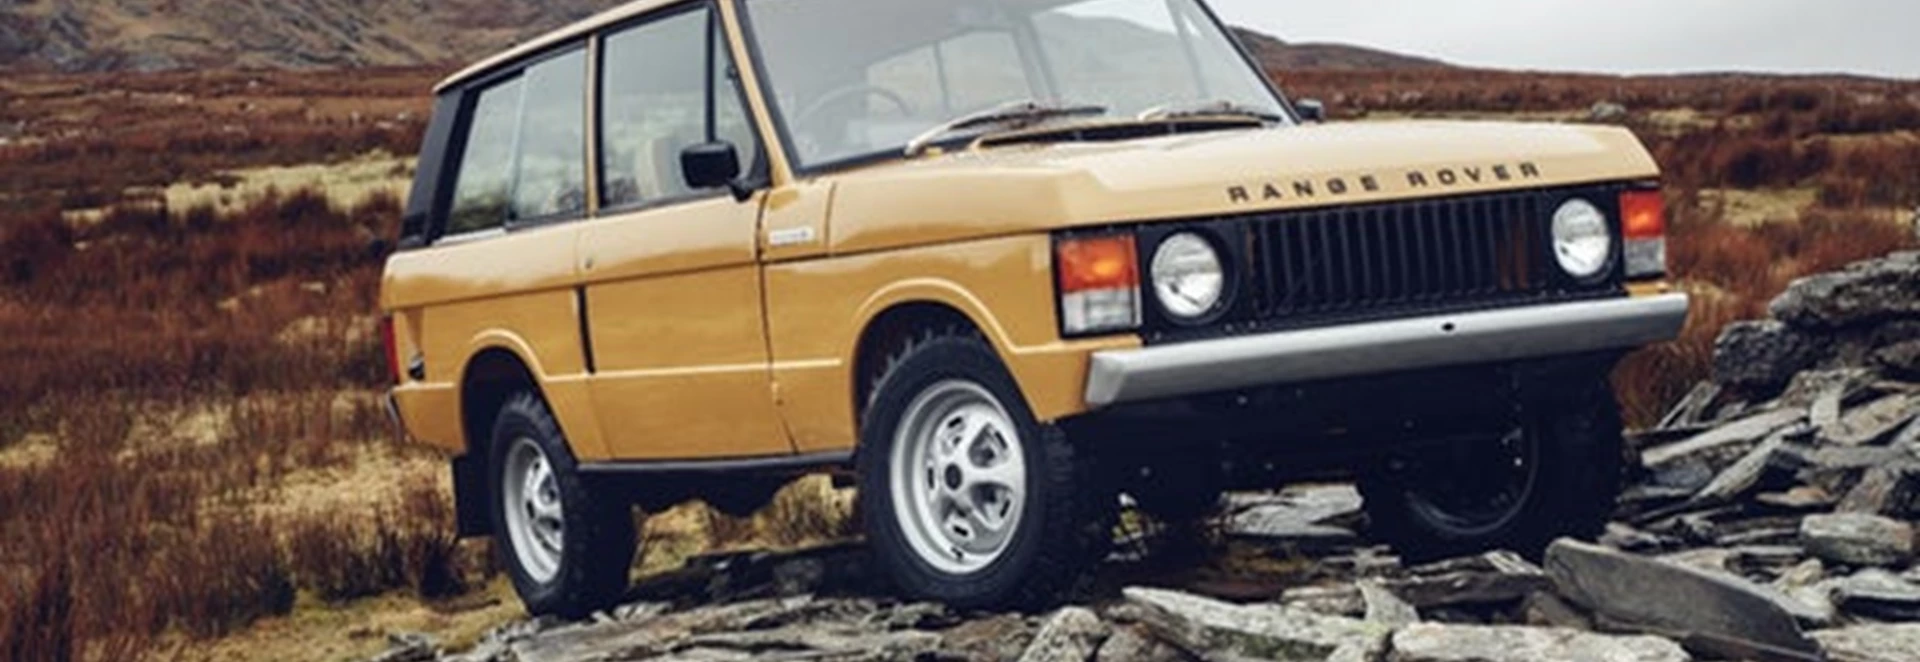 Jaguar Land Rover is bringing back the original Range Rover exactly as it was